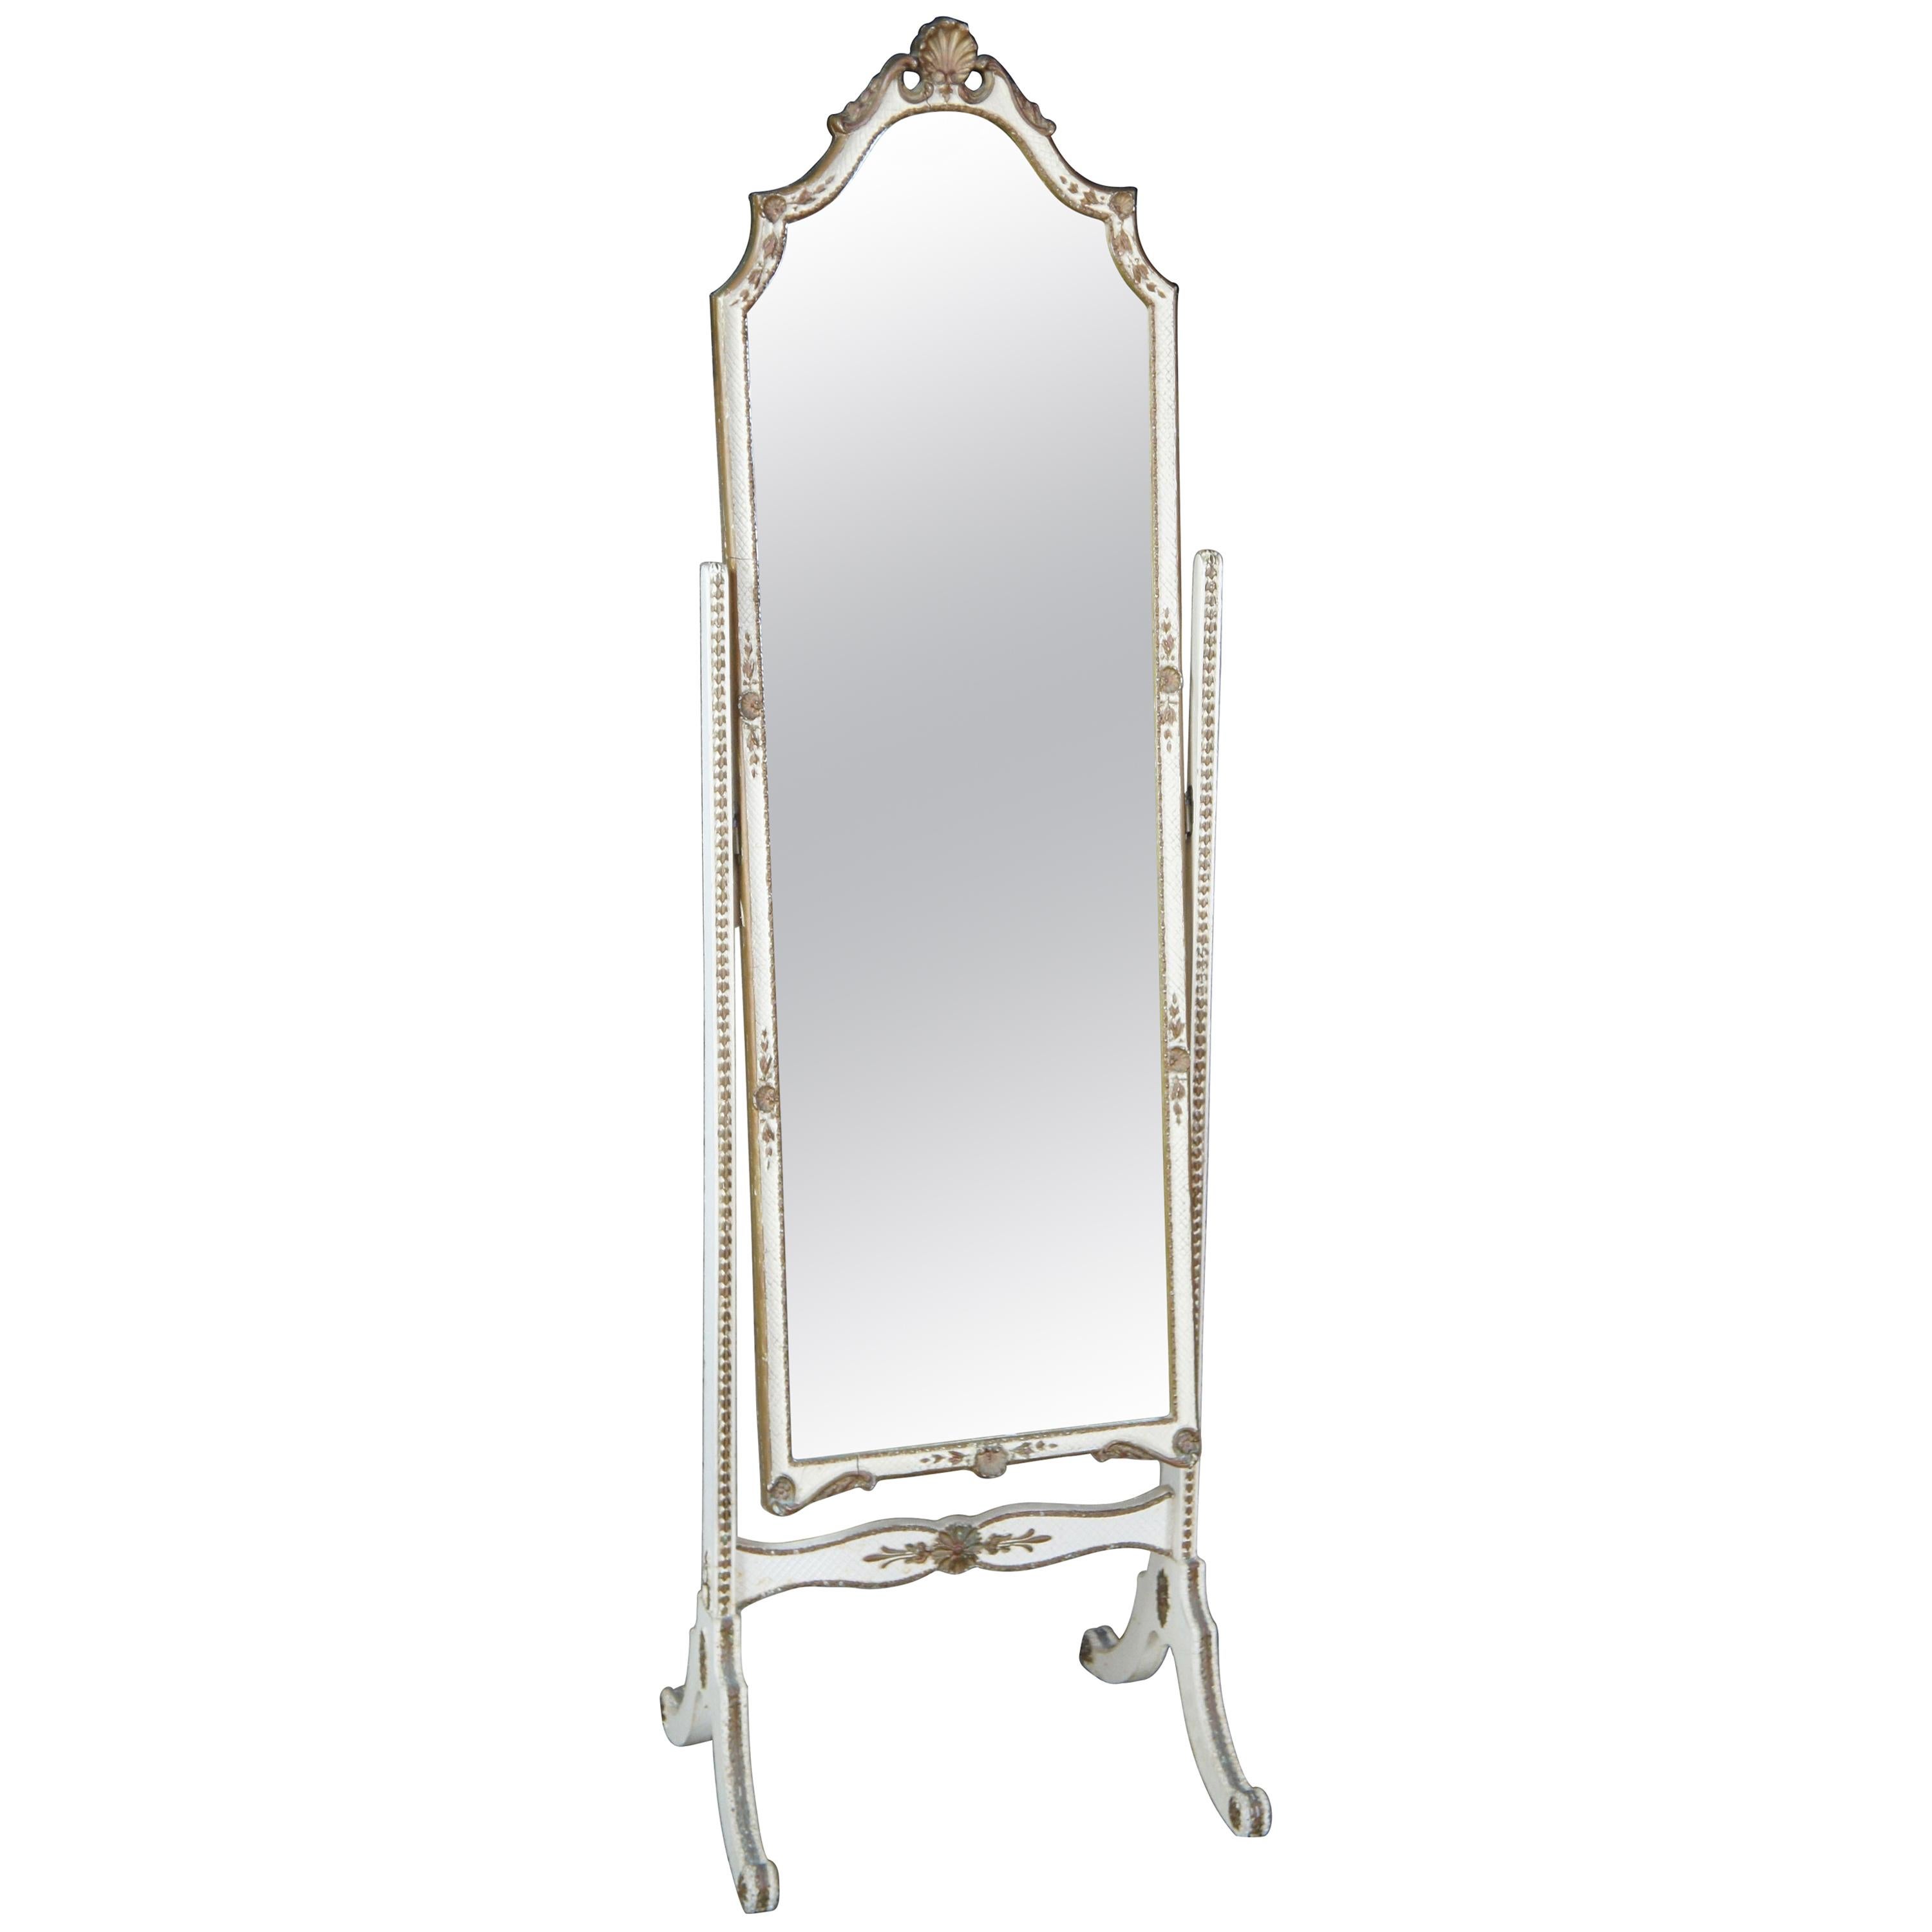 FULL LENGTH FREE STANDING FRENCH STYLE SILVER BEDROOM DRESSING MIRROR CHEWAL NEW 